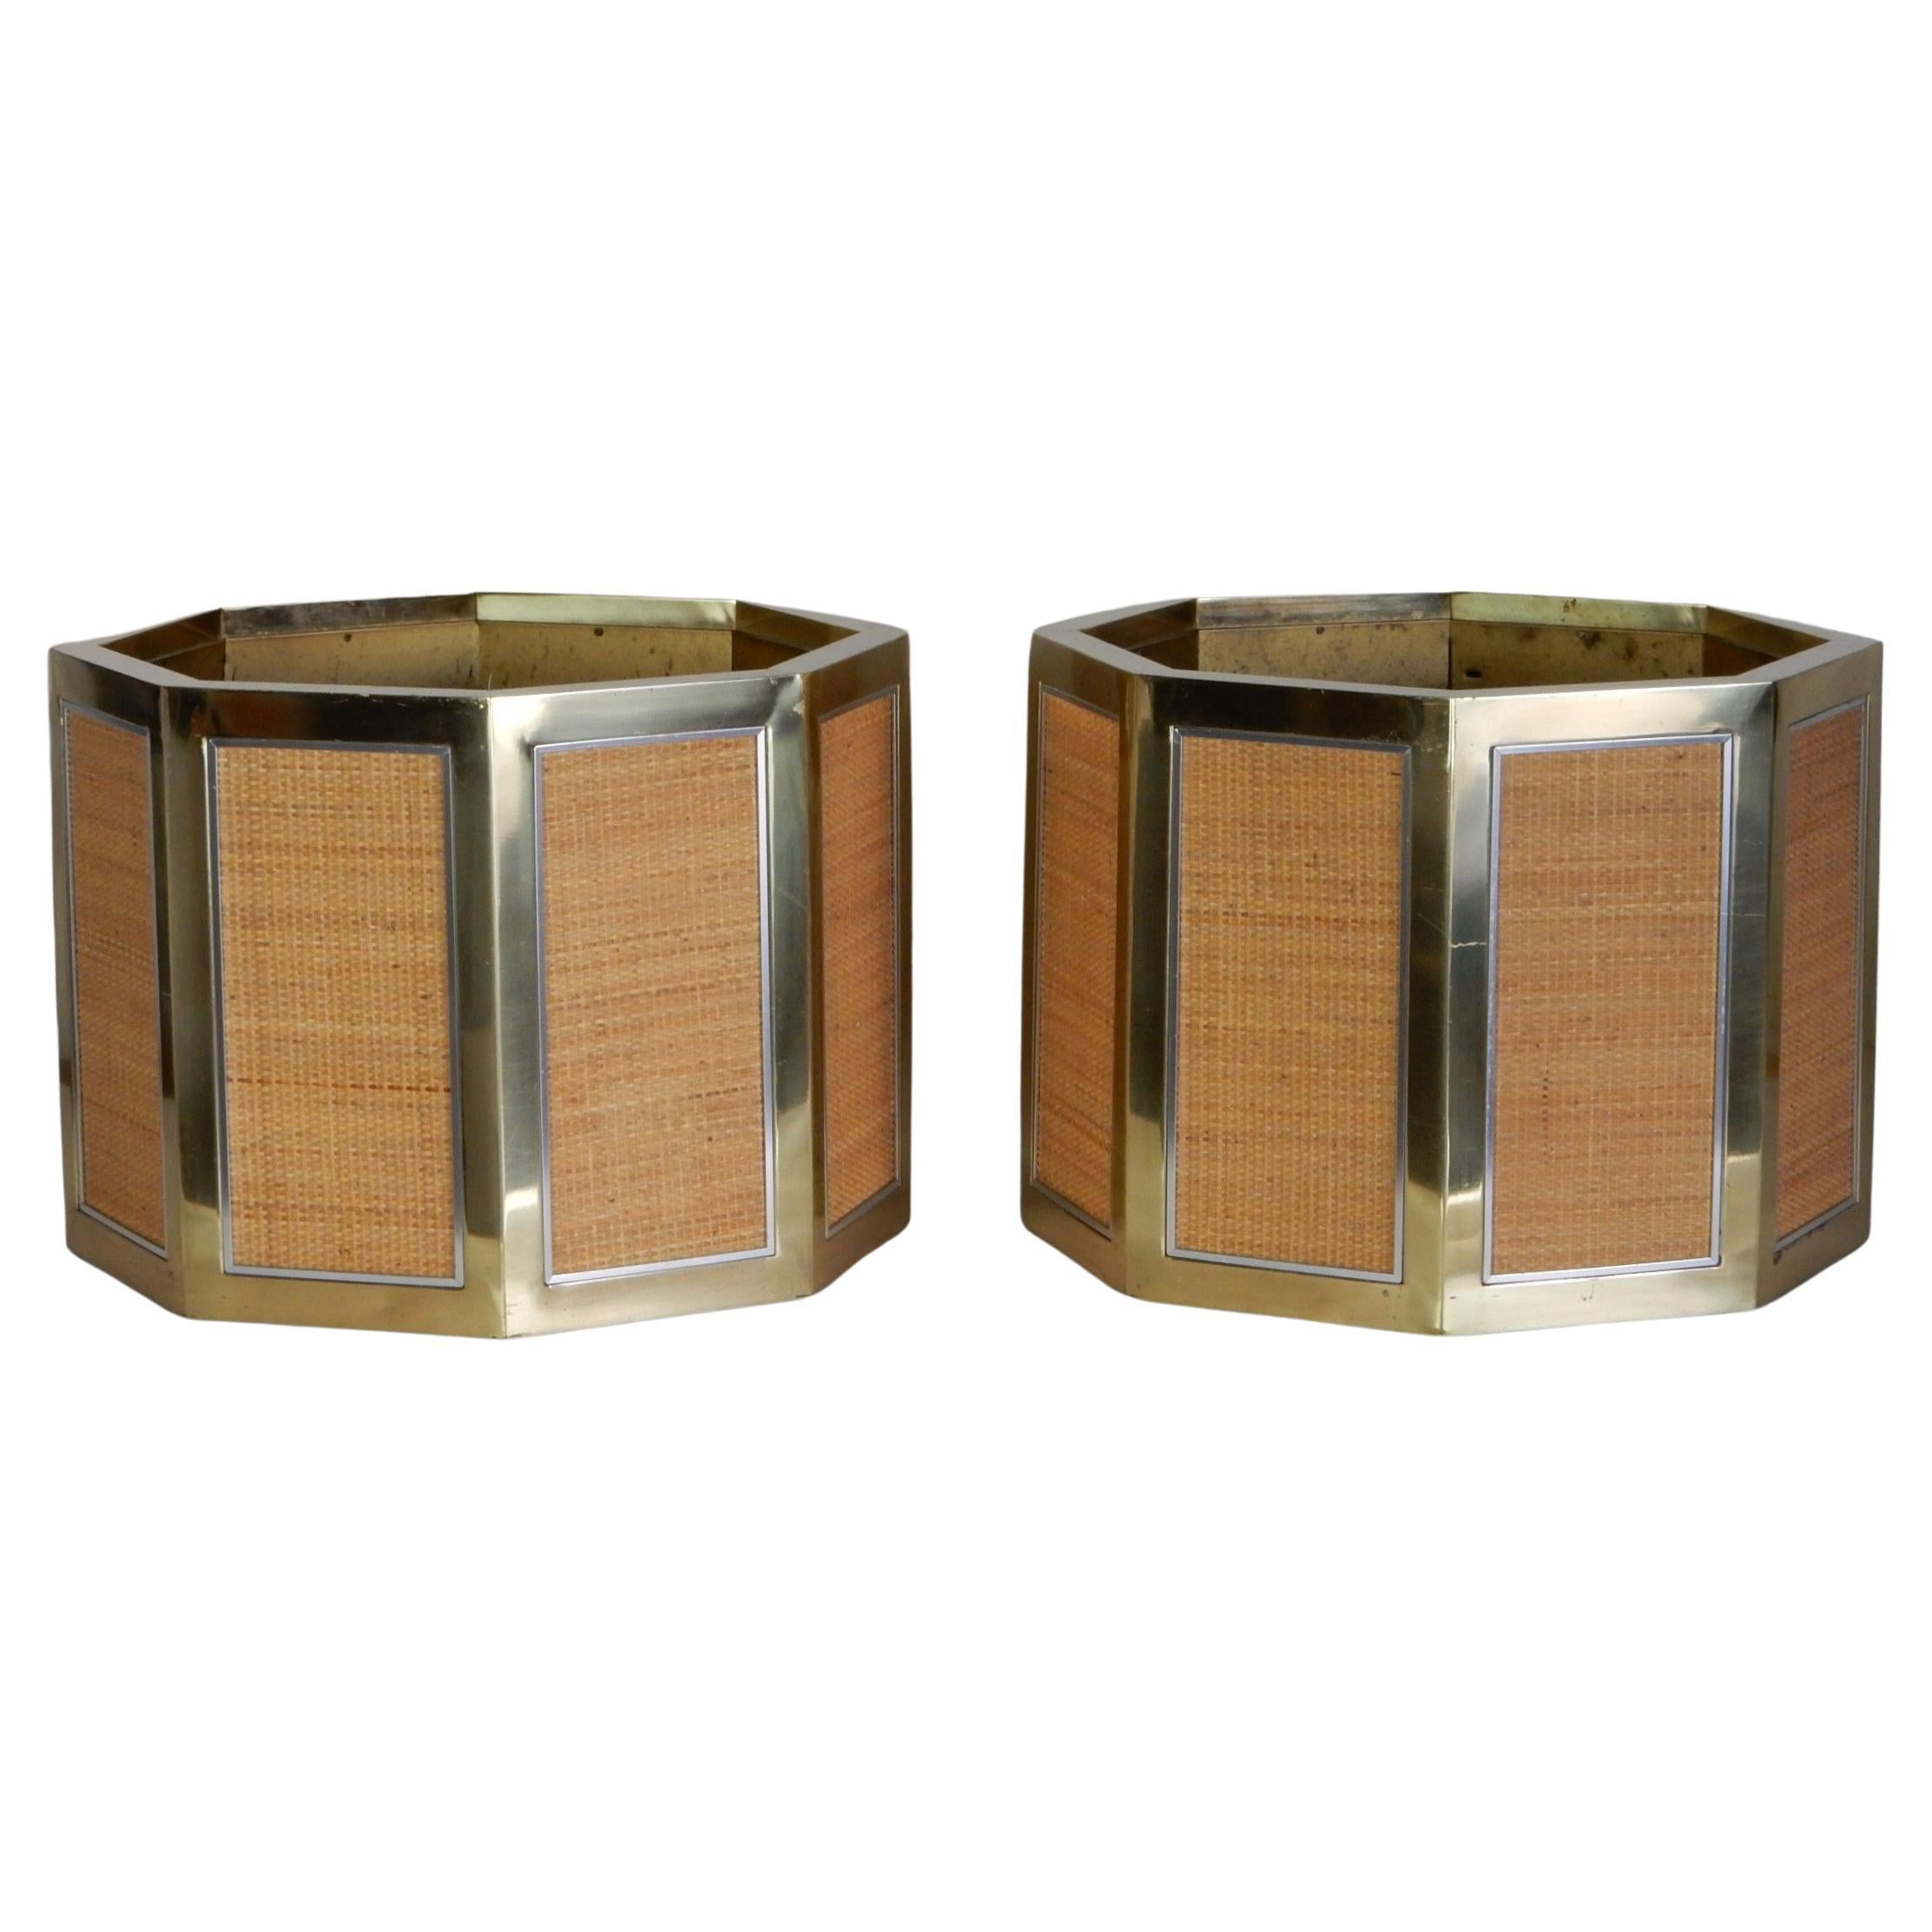 Rare massive scale octagon planter pots (pair) designed by Romeo Rega for Mario Sabot. Made in Italy, 1970's.
Formed on brass with 8 woven cane panels each trimmed in a polished steel frame.  Steel lining with adjustable height base.
25